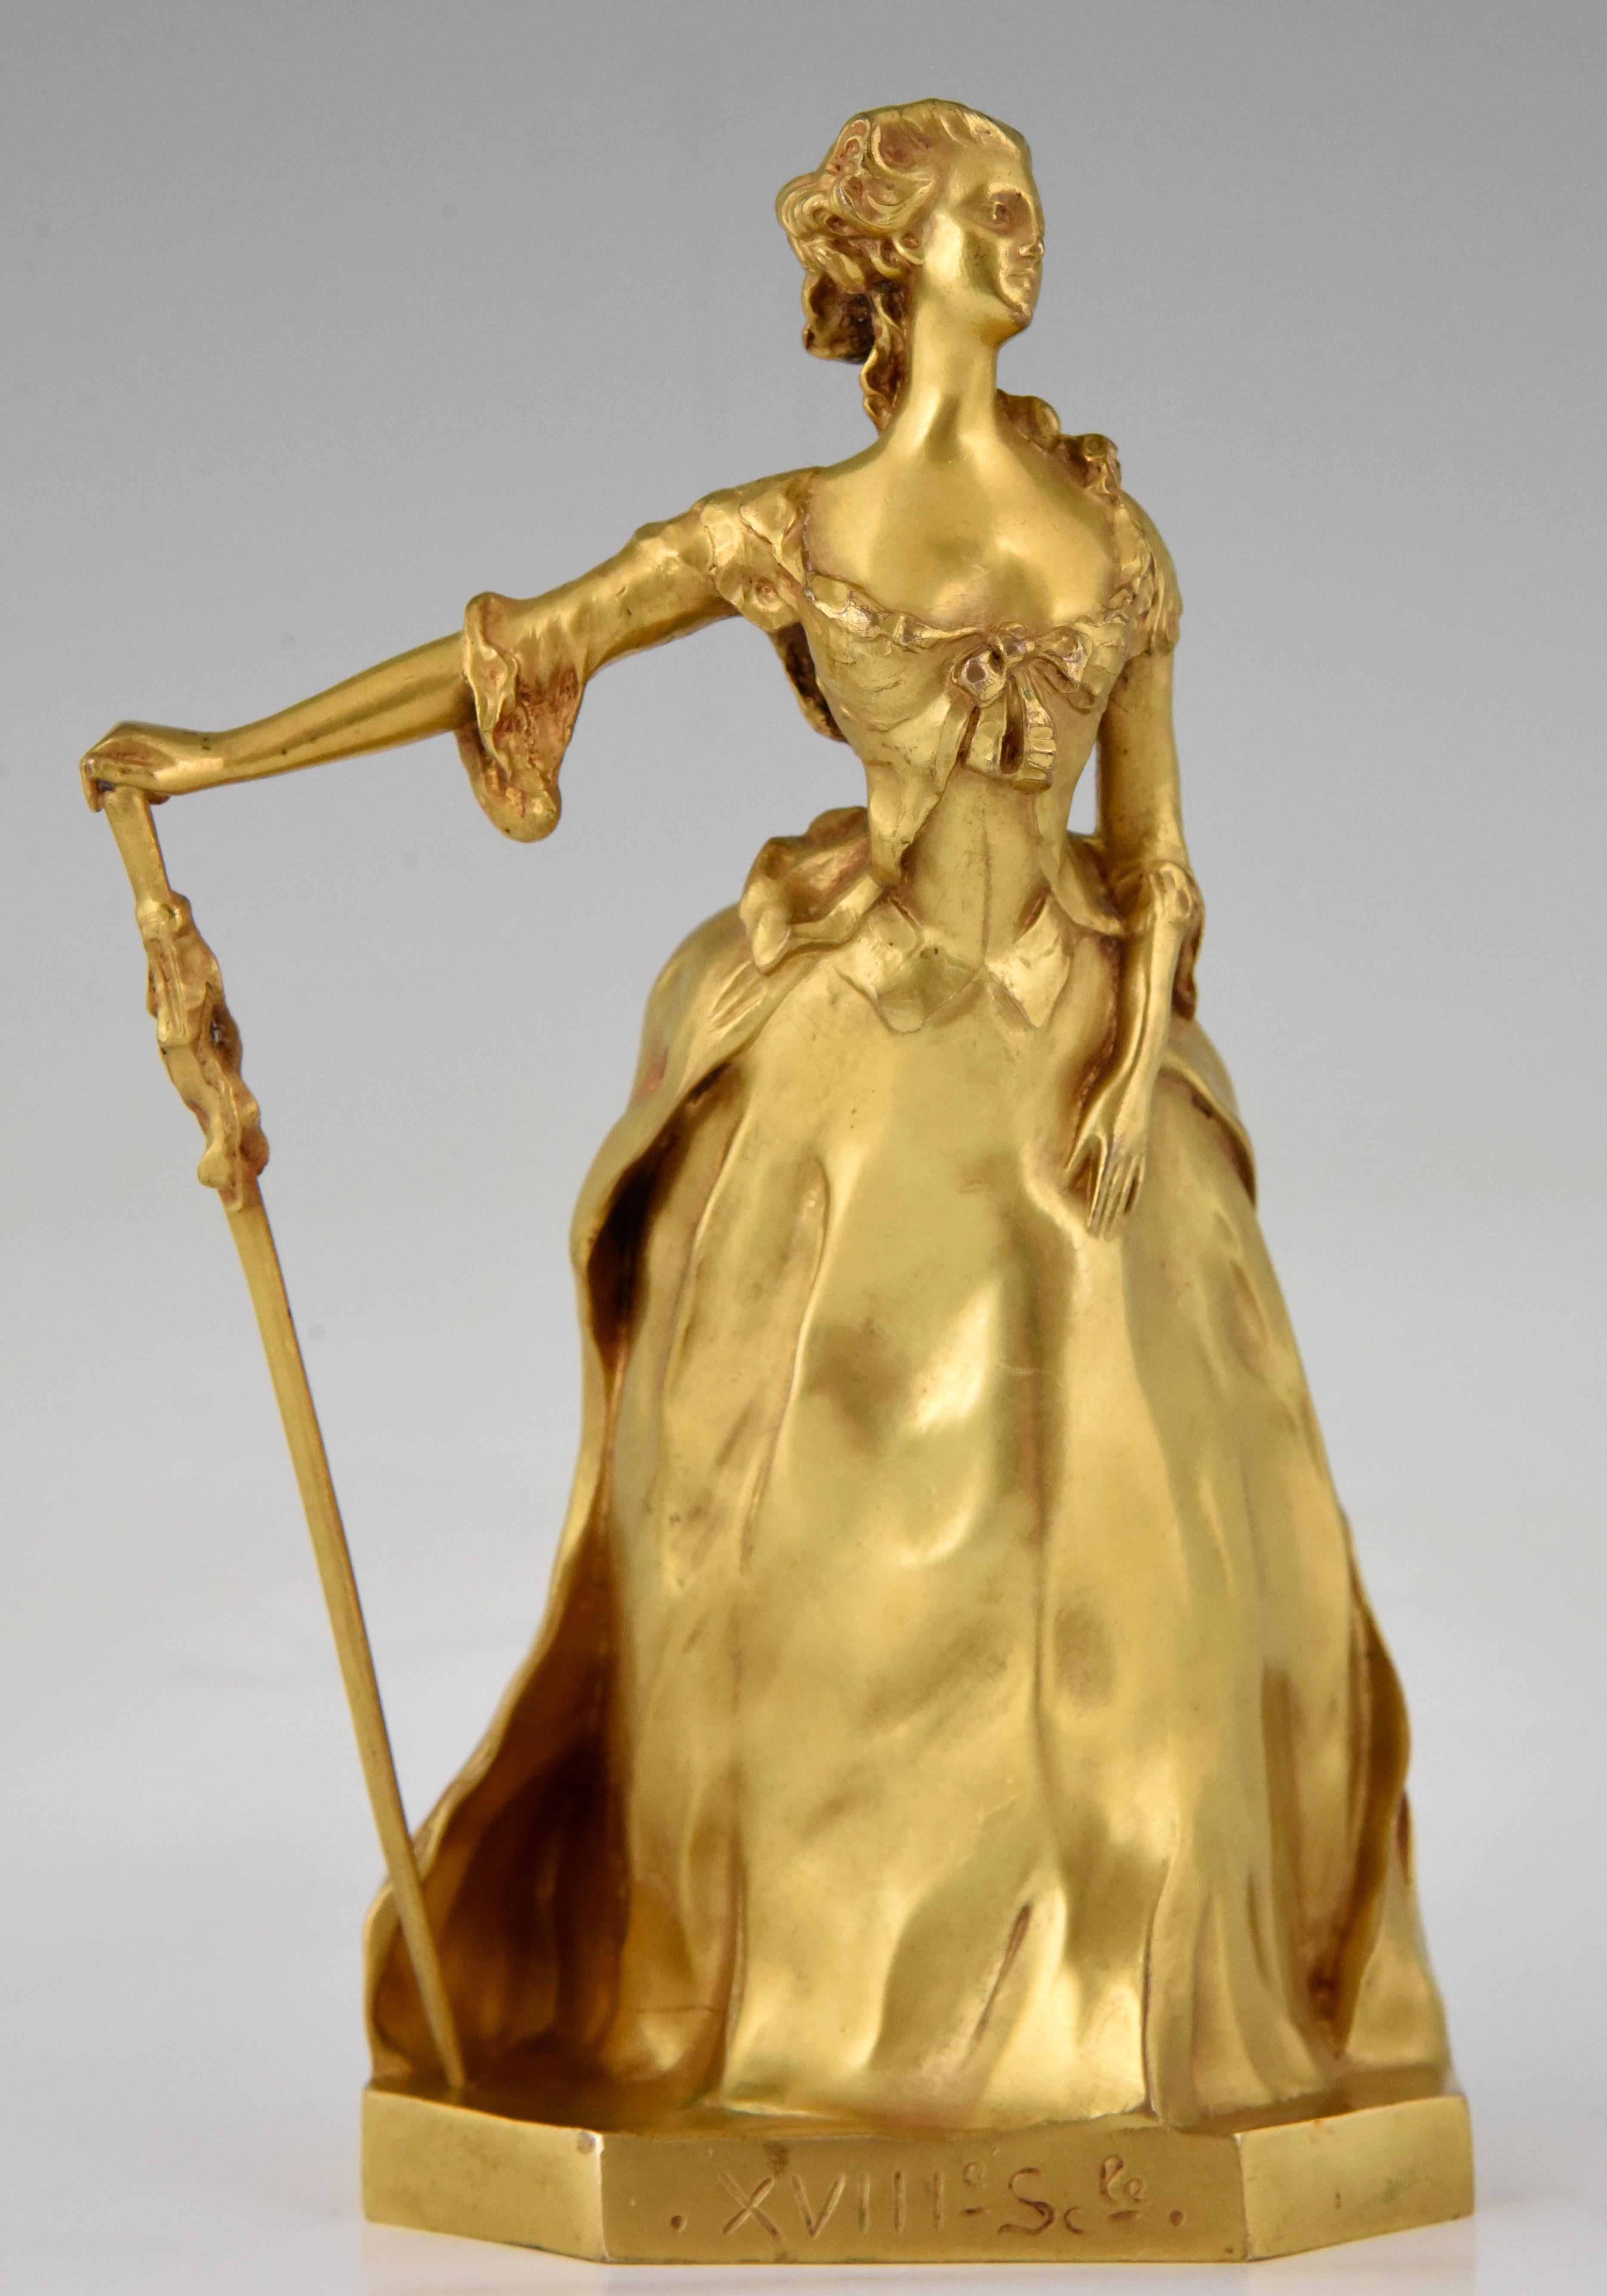 Art Nouveau gilt bronze sculpture of an elegant woman entitled Parisienne of the 18th century. This beautiful bronze is signed by Henri Frederic Varenne and bears the Susse Freres foundry mark, cast in France, circa 1900.
Literature:
